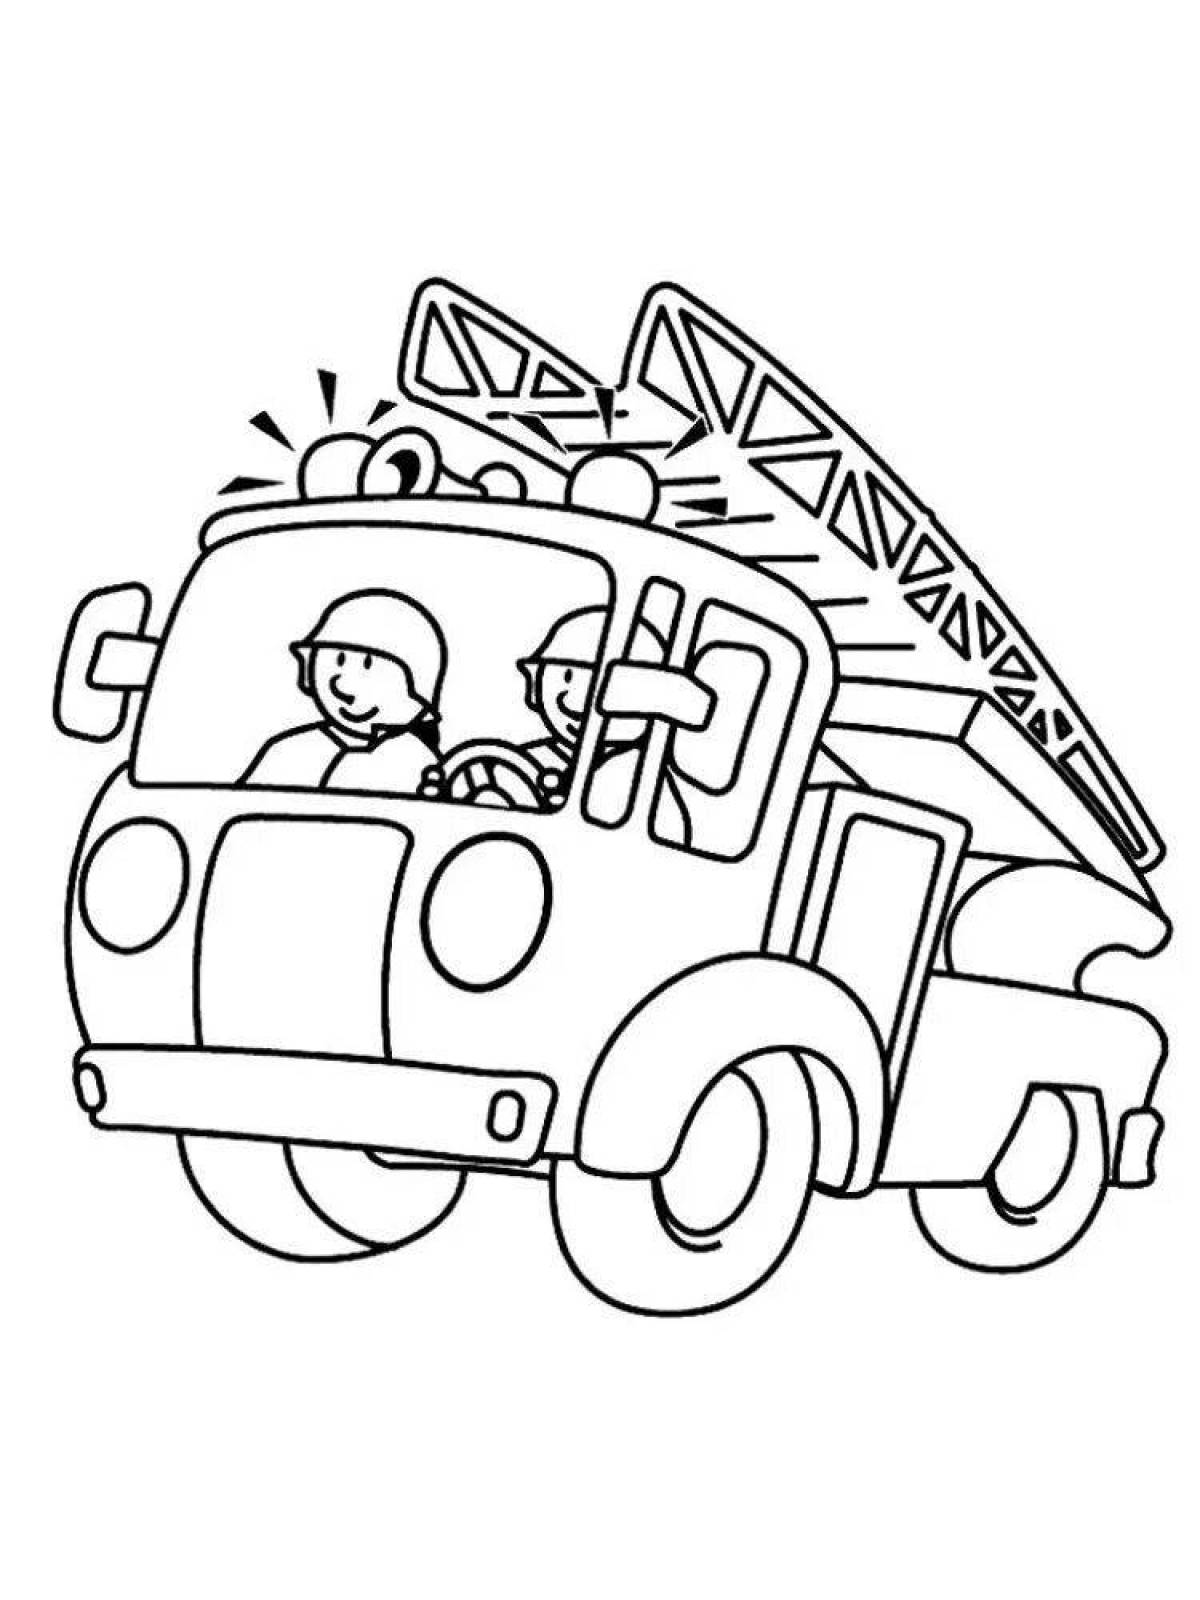 Colourful Fire Safety Coloring Book for Kindergarten